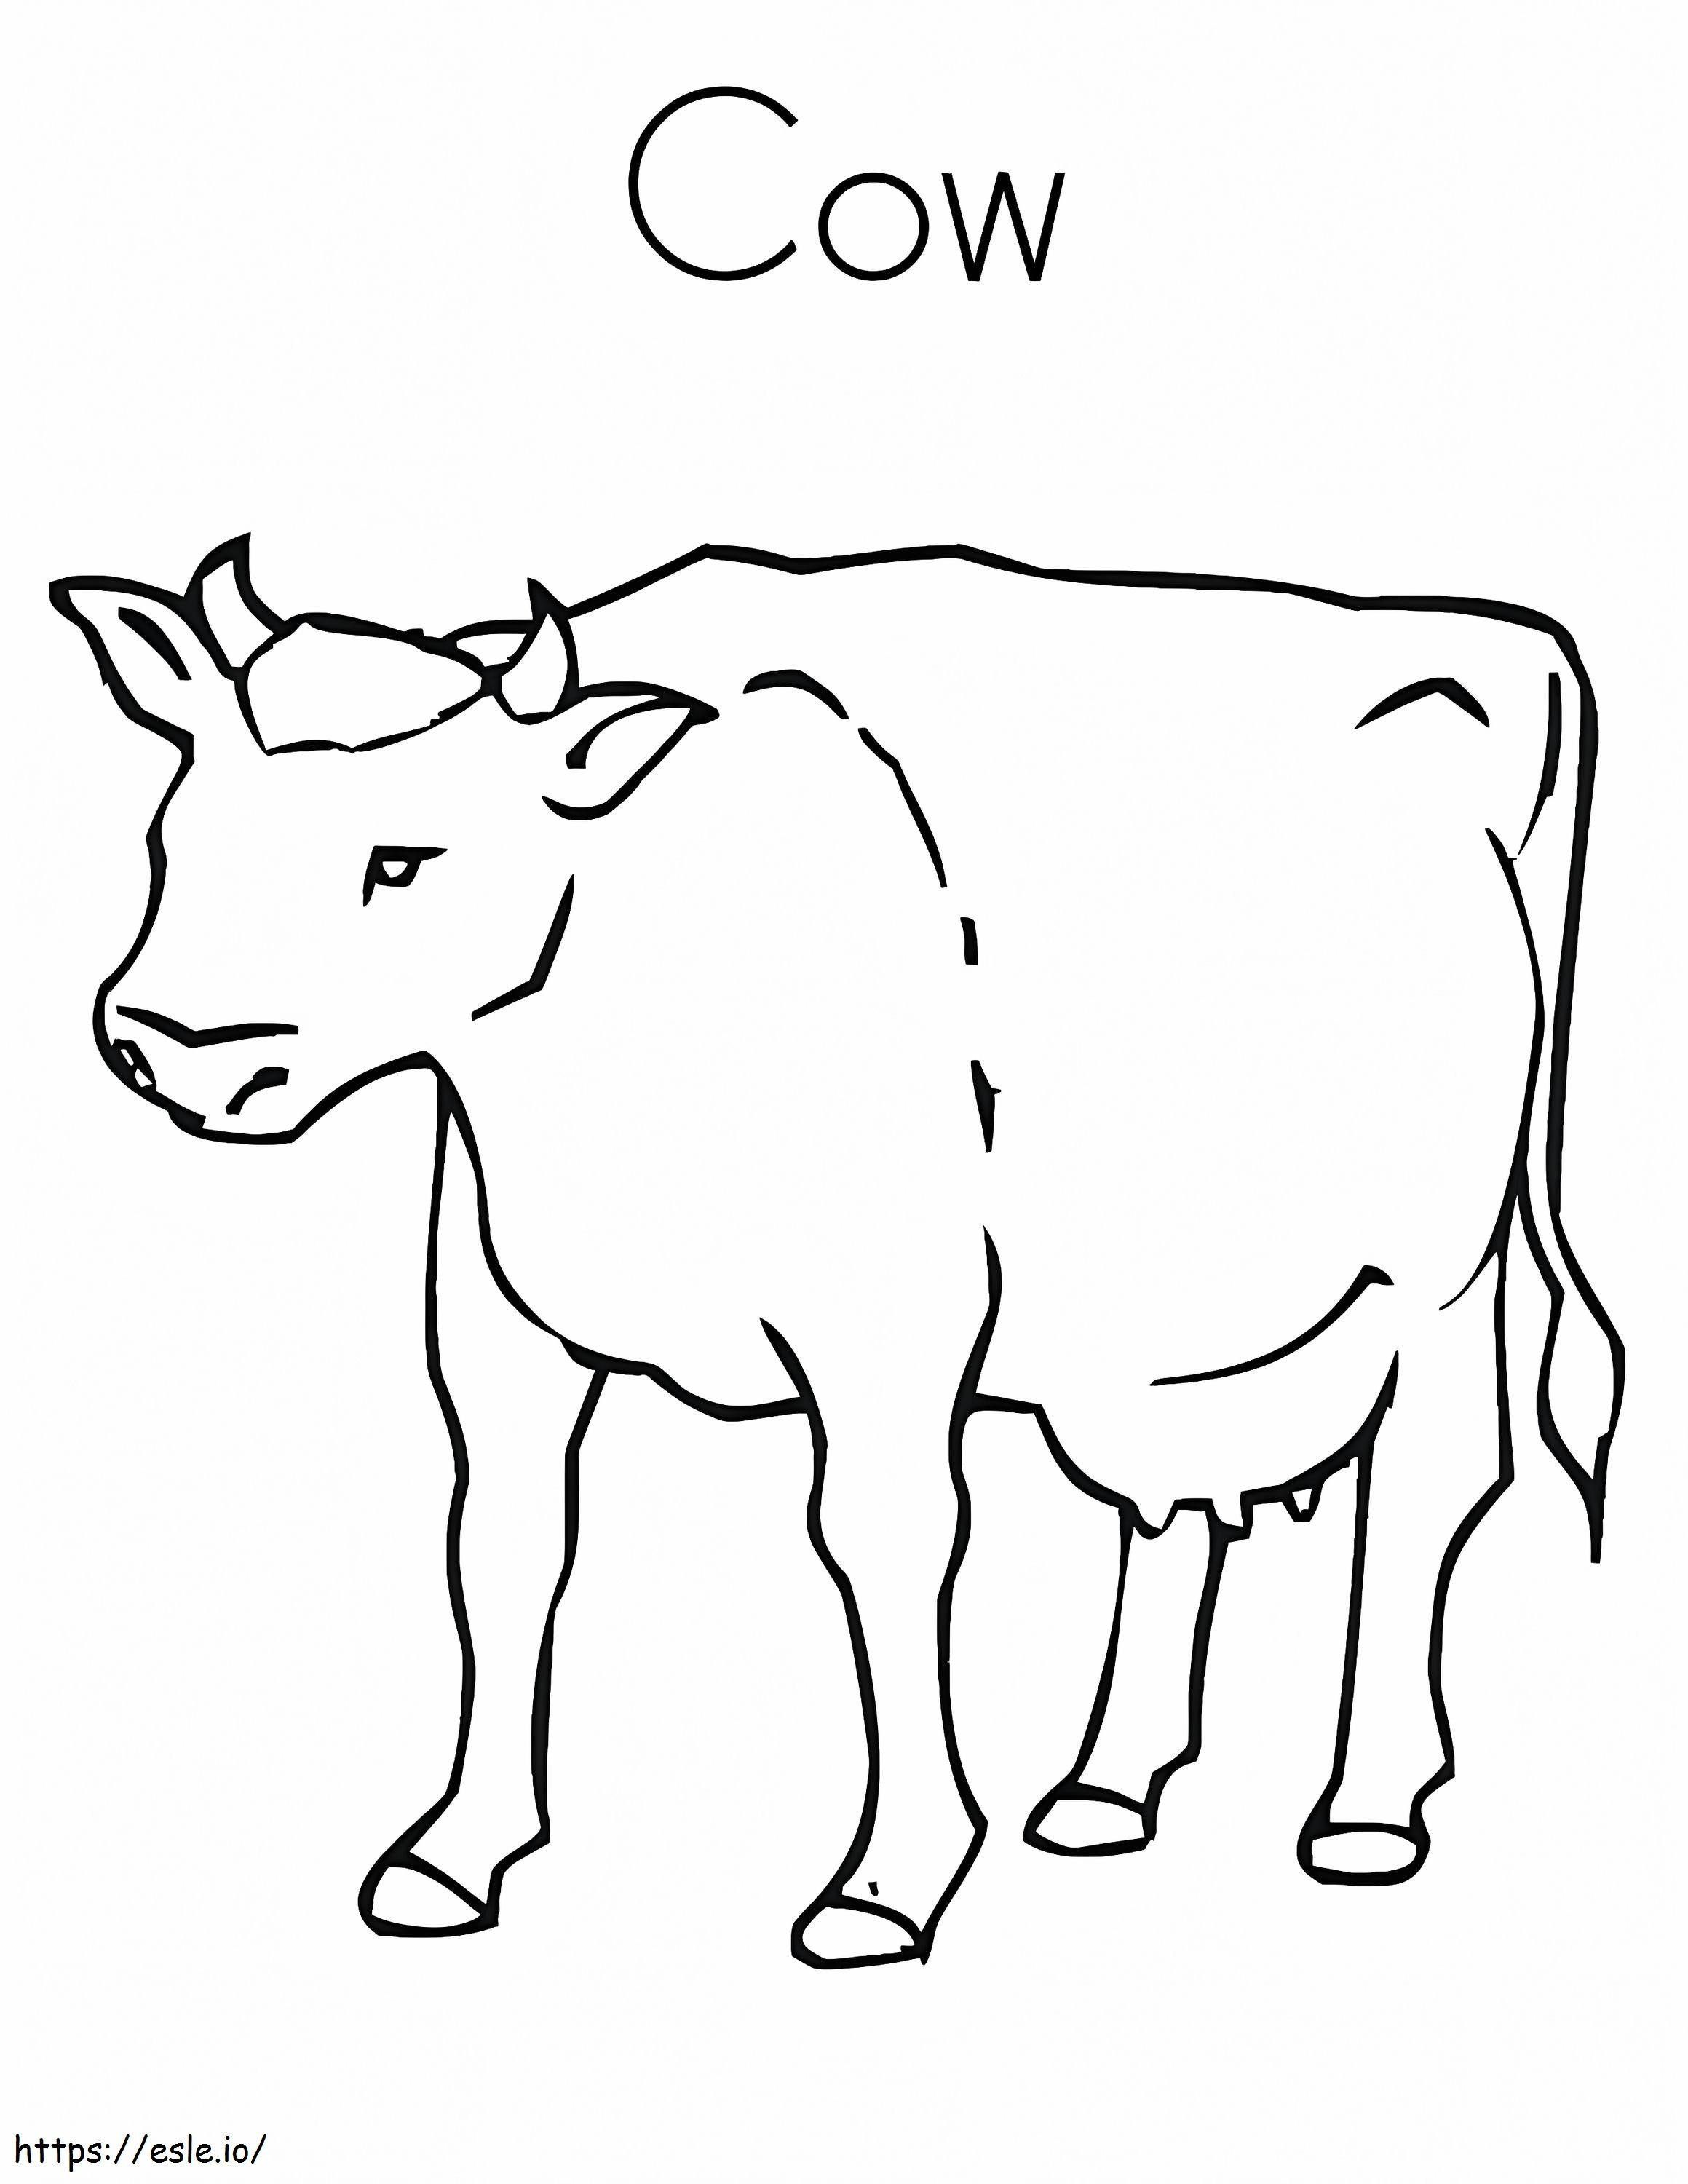 Cow 8 coloring page